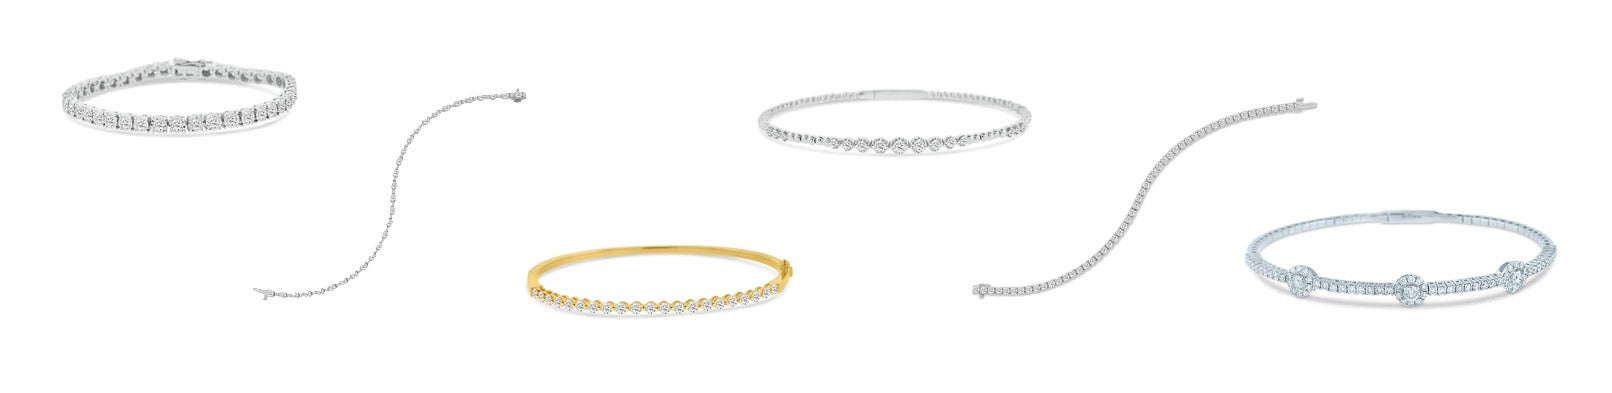 Sparkle in Style: The Ultimate Guide to Diamond Tennis Bracelets for Women and Men